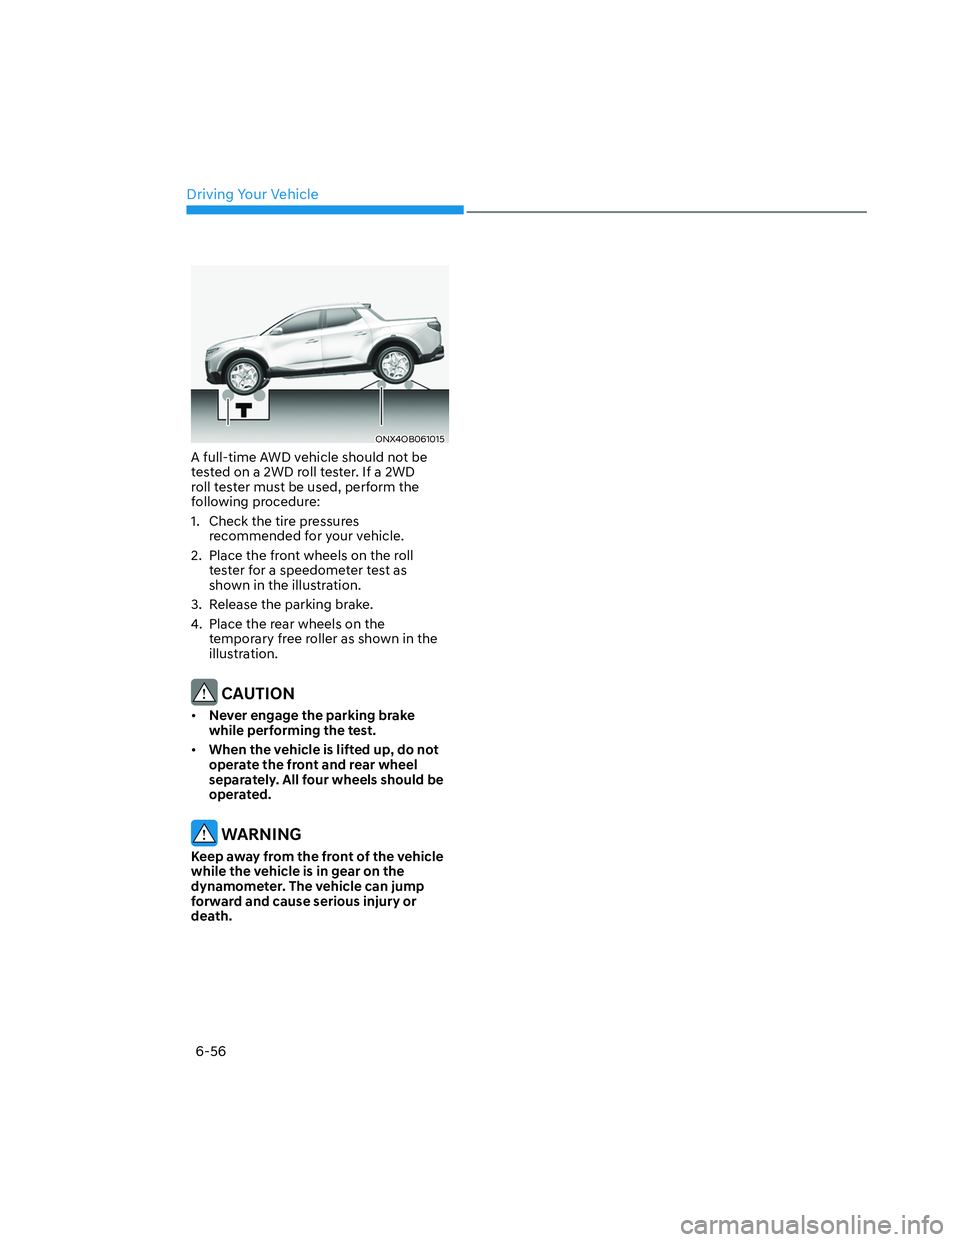 HYUNDAI SANTA CRUZ 2022 User Guide Driving Your Vehicle
6-56
ONX4OB061015ONX4OB061015
A full-time AWD vehicle should not be 
tested on a 2WD roll tester. If a 2WD 
roll tester must be used, perform the 
following procedure:
1.  Check t